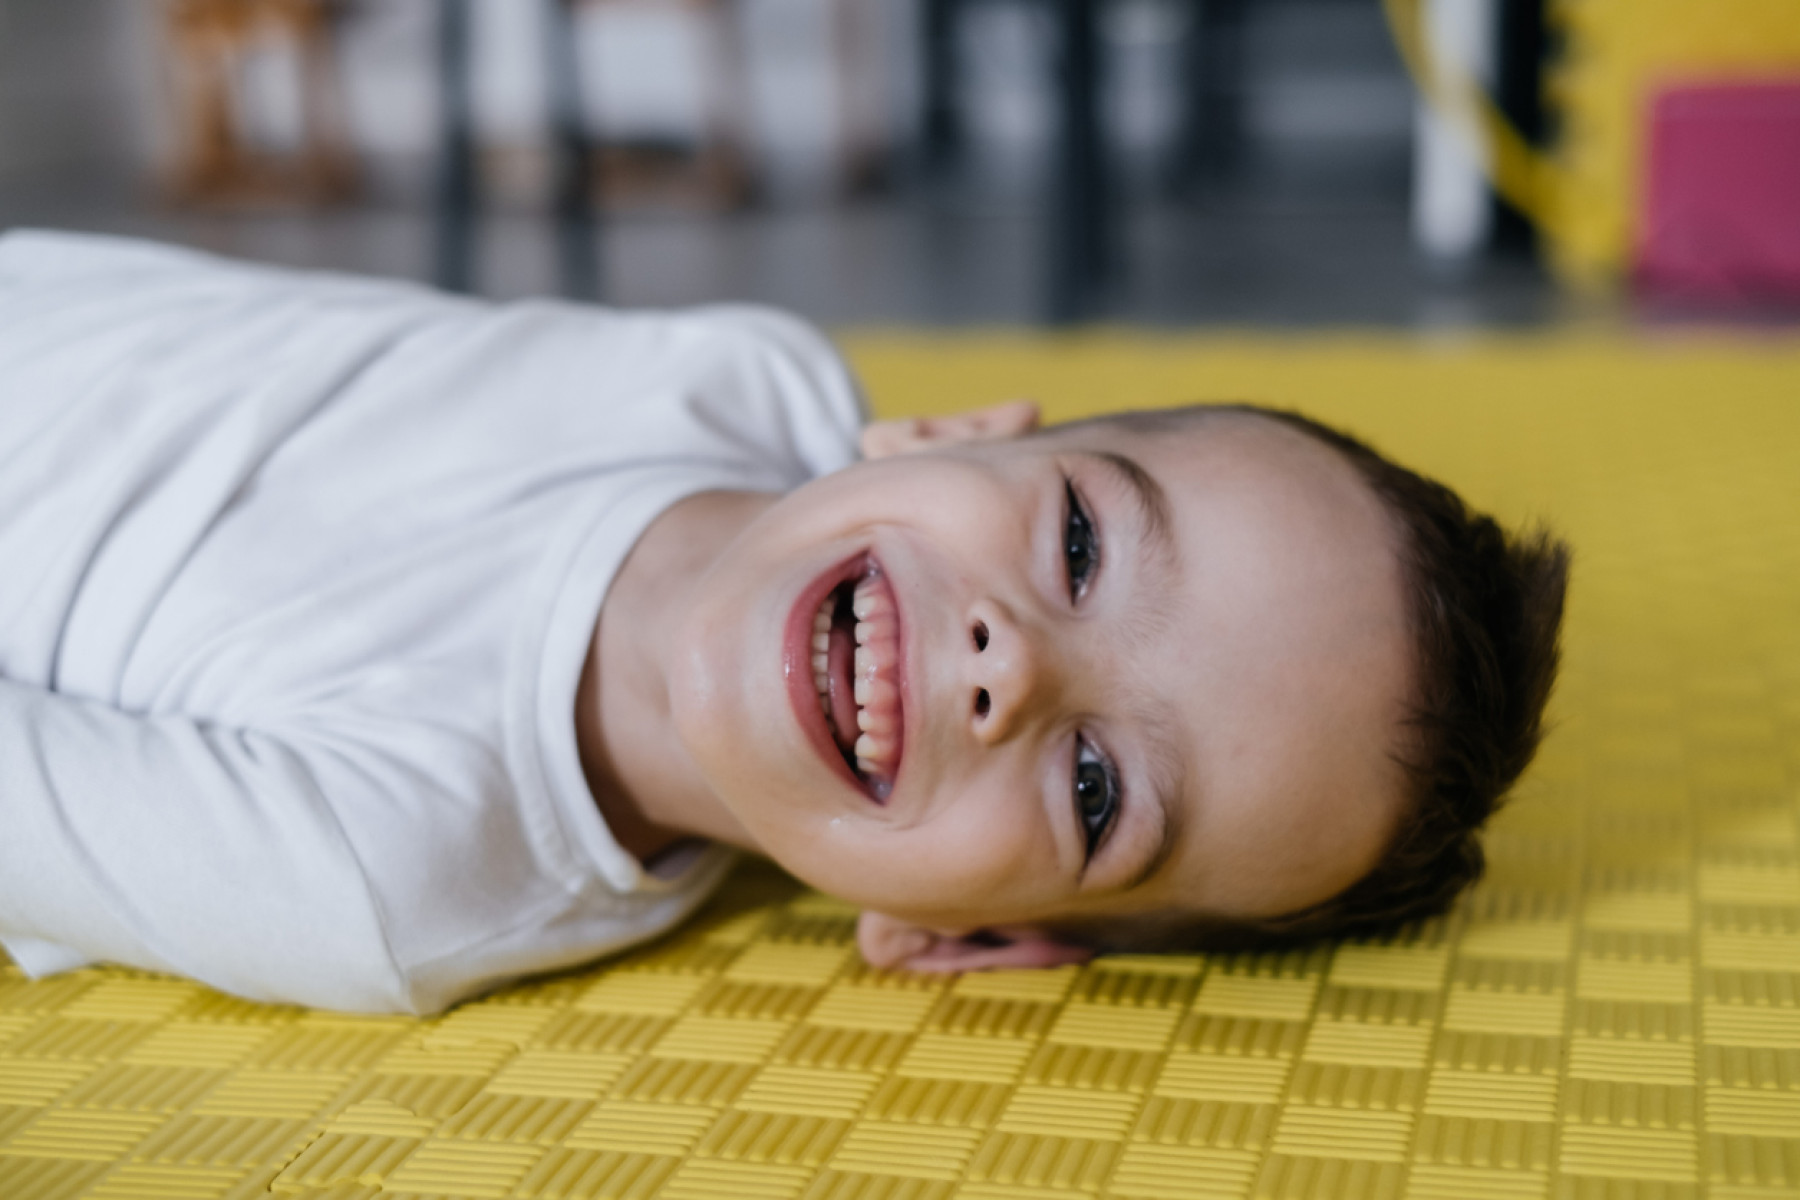 A radiant young boy with cerebral palsy support lays on a yellow mat, gleaming with a cheerful smile.